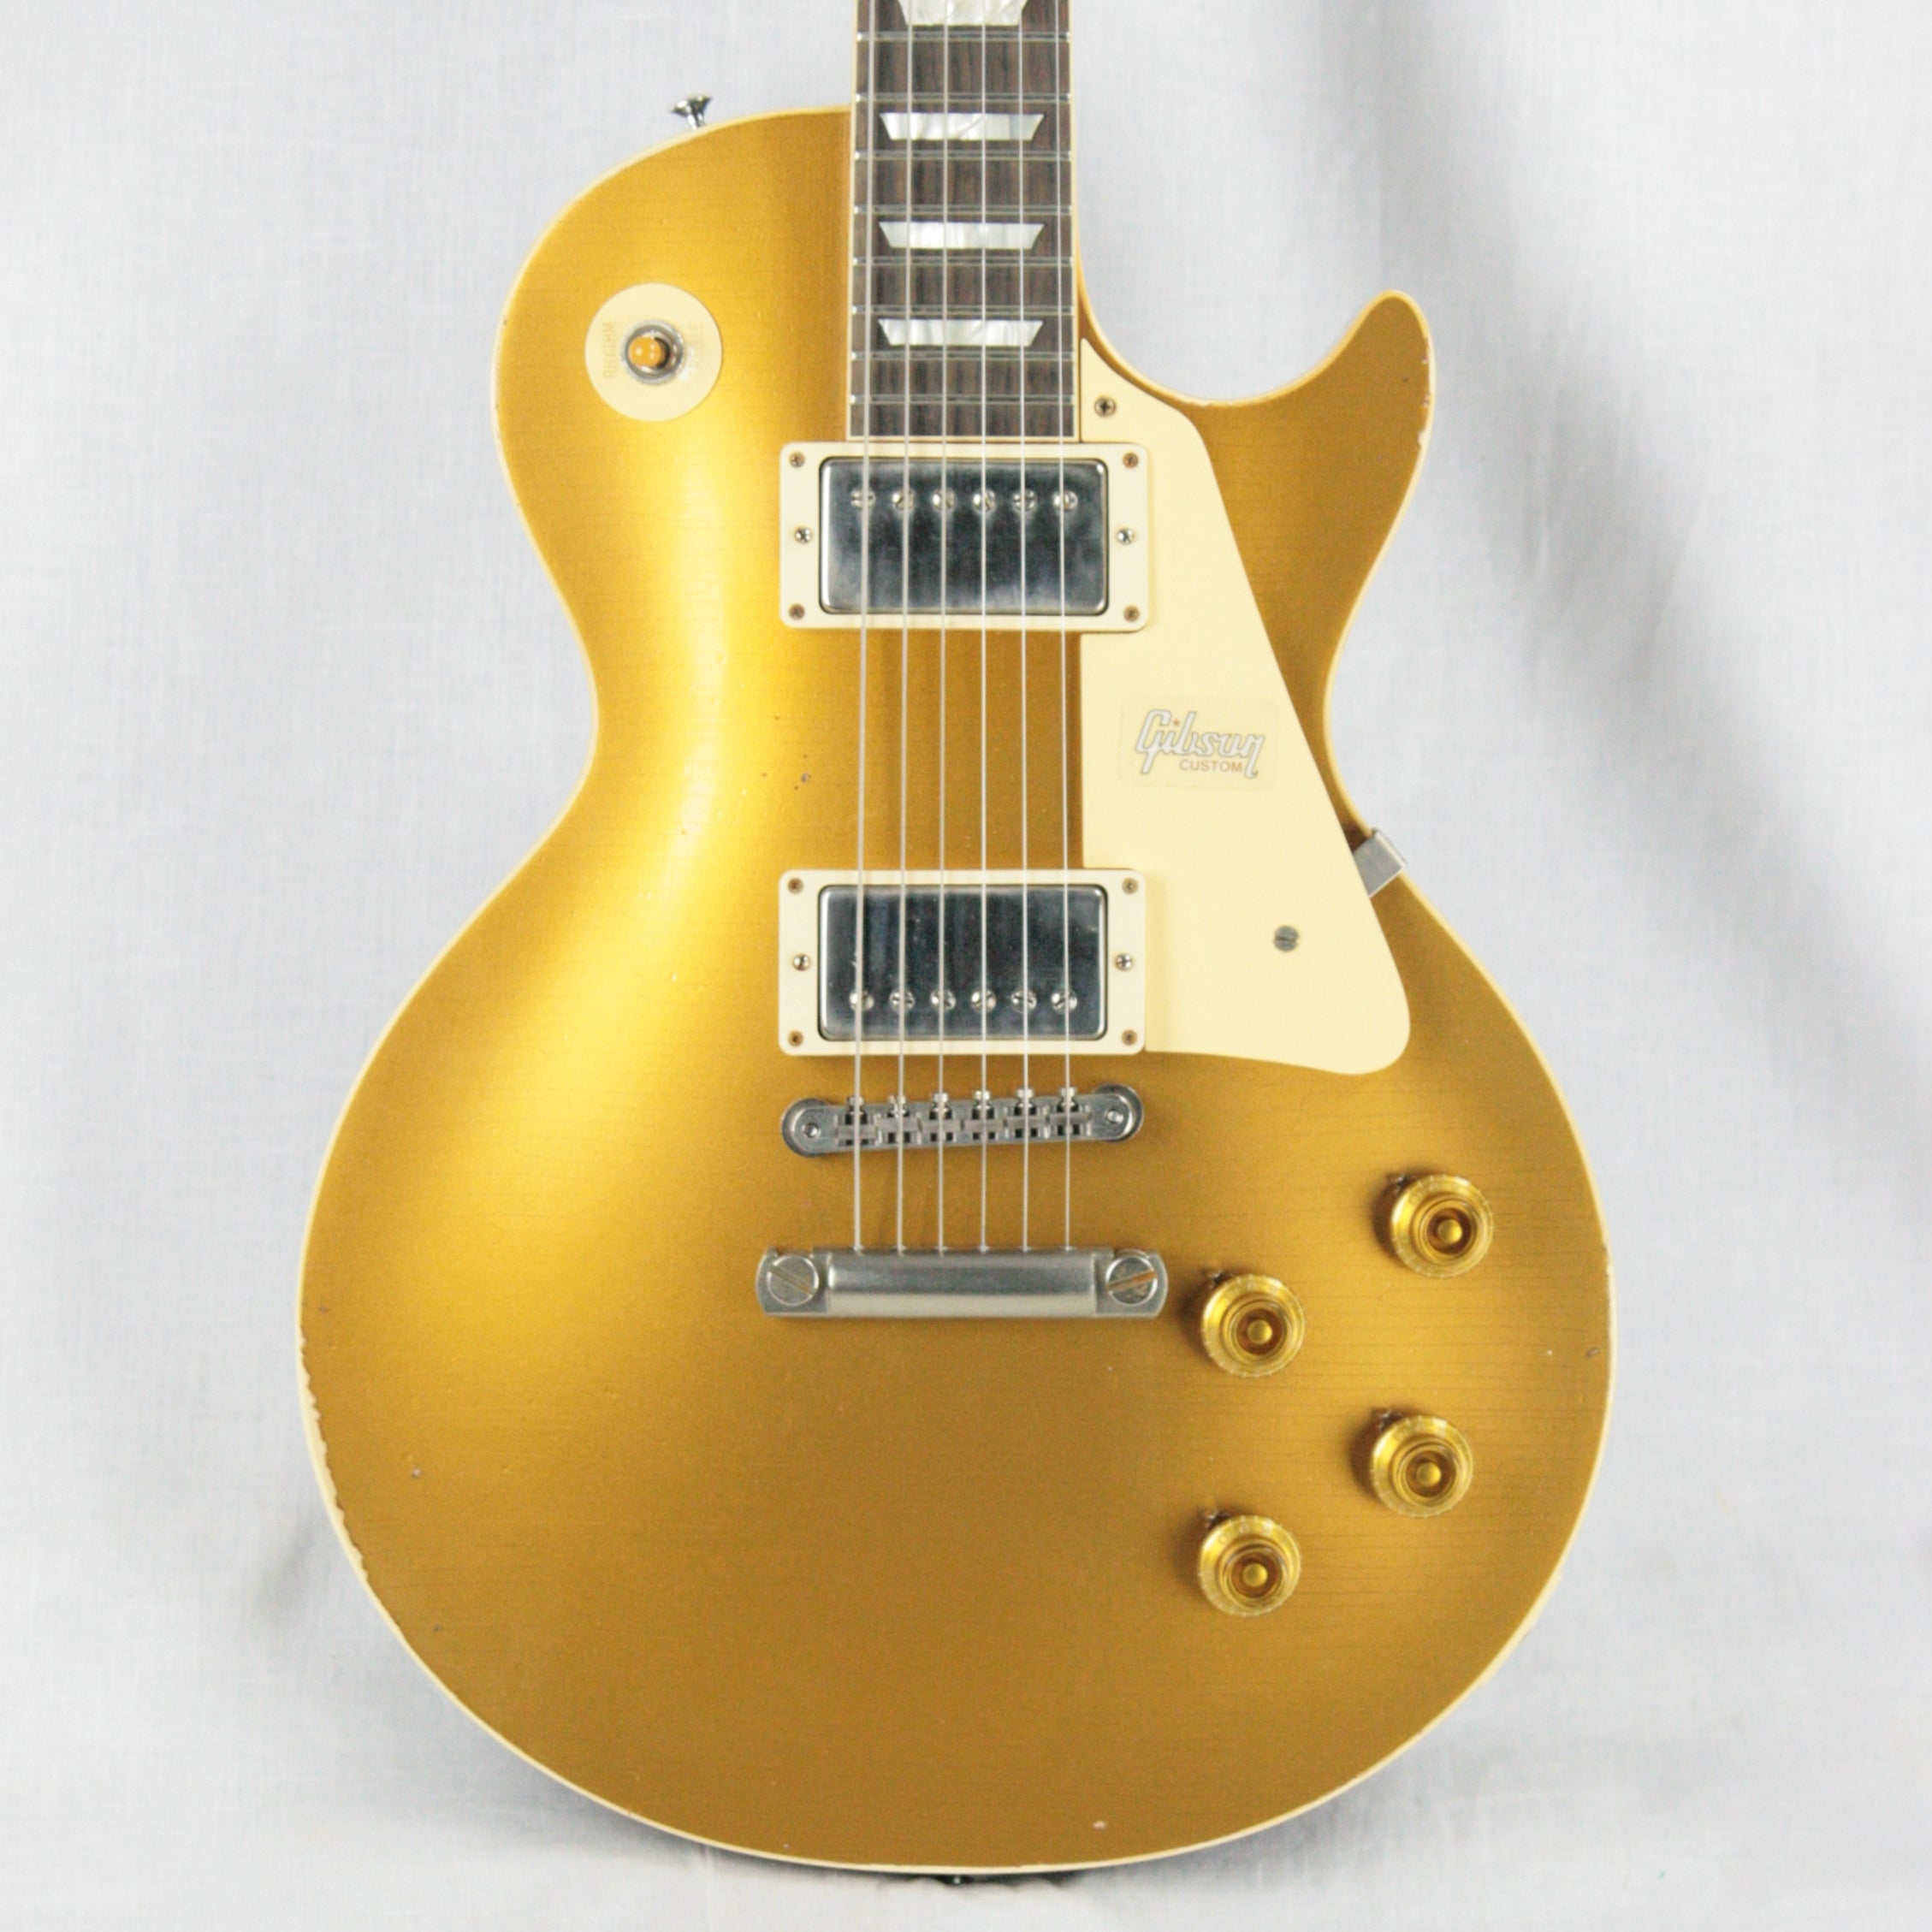 *SOLD*  2018 Gibson 1957 HEAVY AGED Goldtop Les Paul Historic Reissue! R7 57 8.9 lbs!